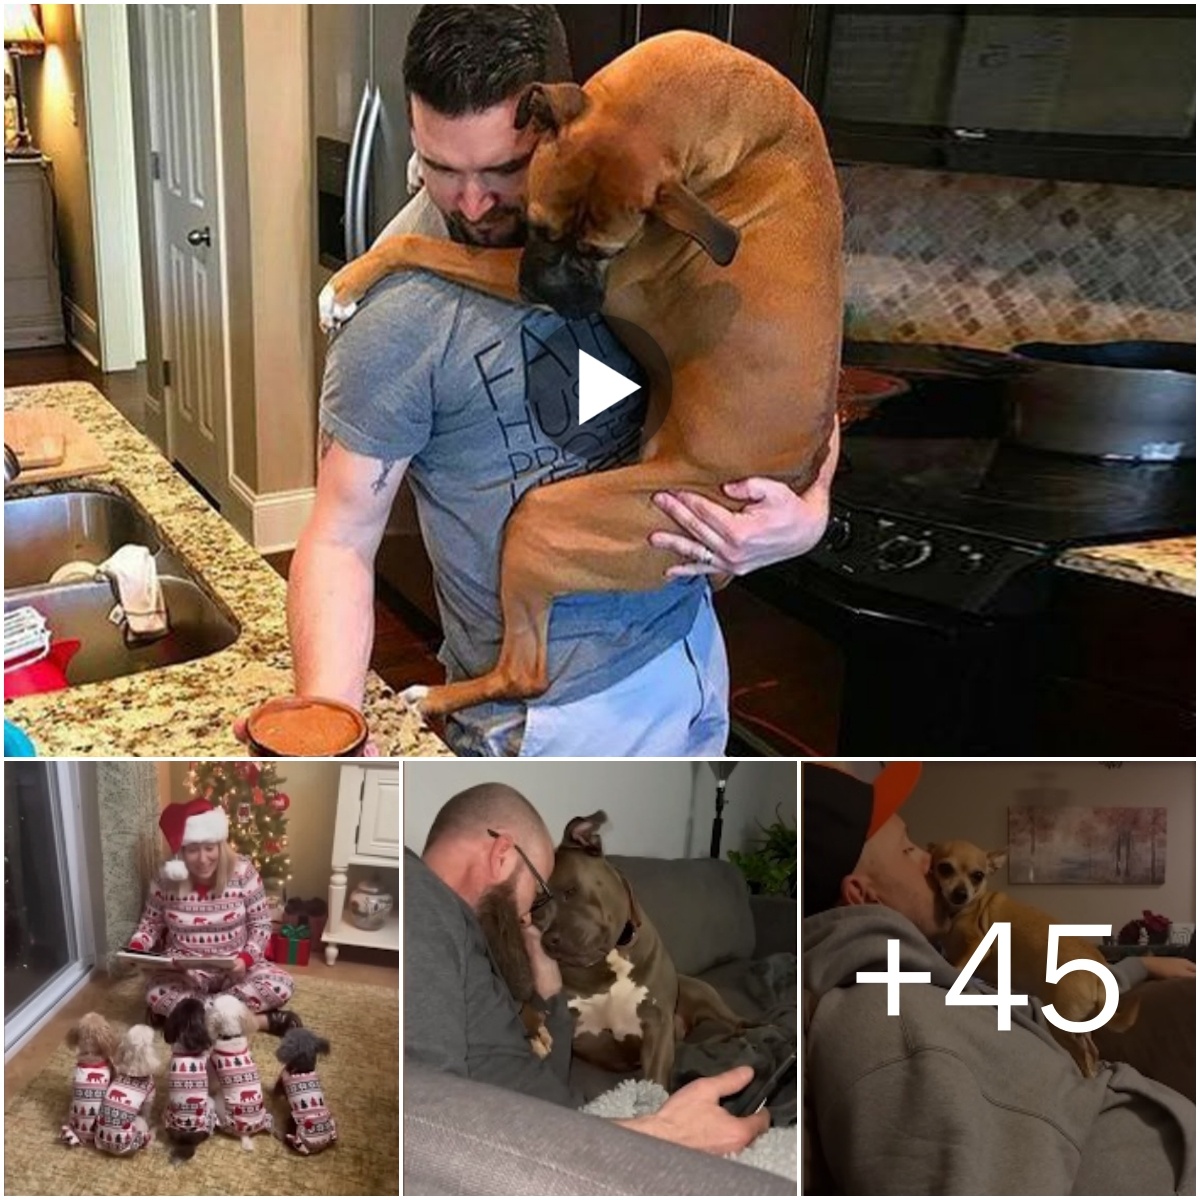 (Video) 50 Moments Adorable Dog’s Endless Hugs for Their Human – Irresistible Cuteness!